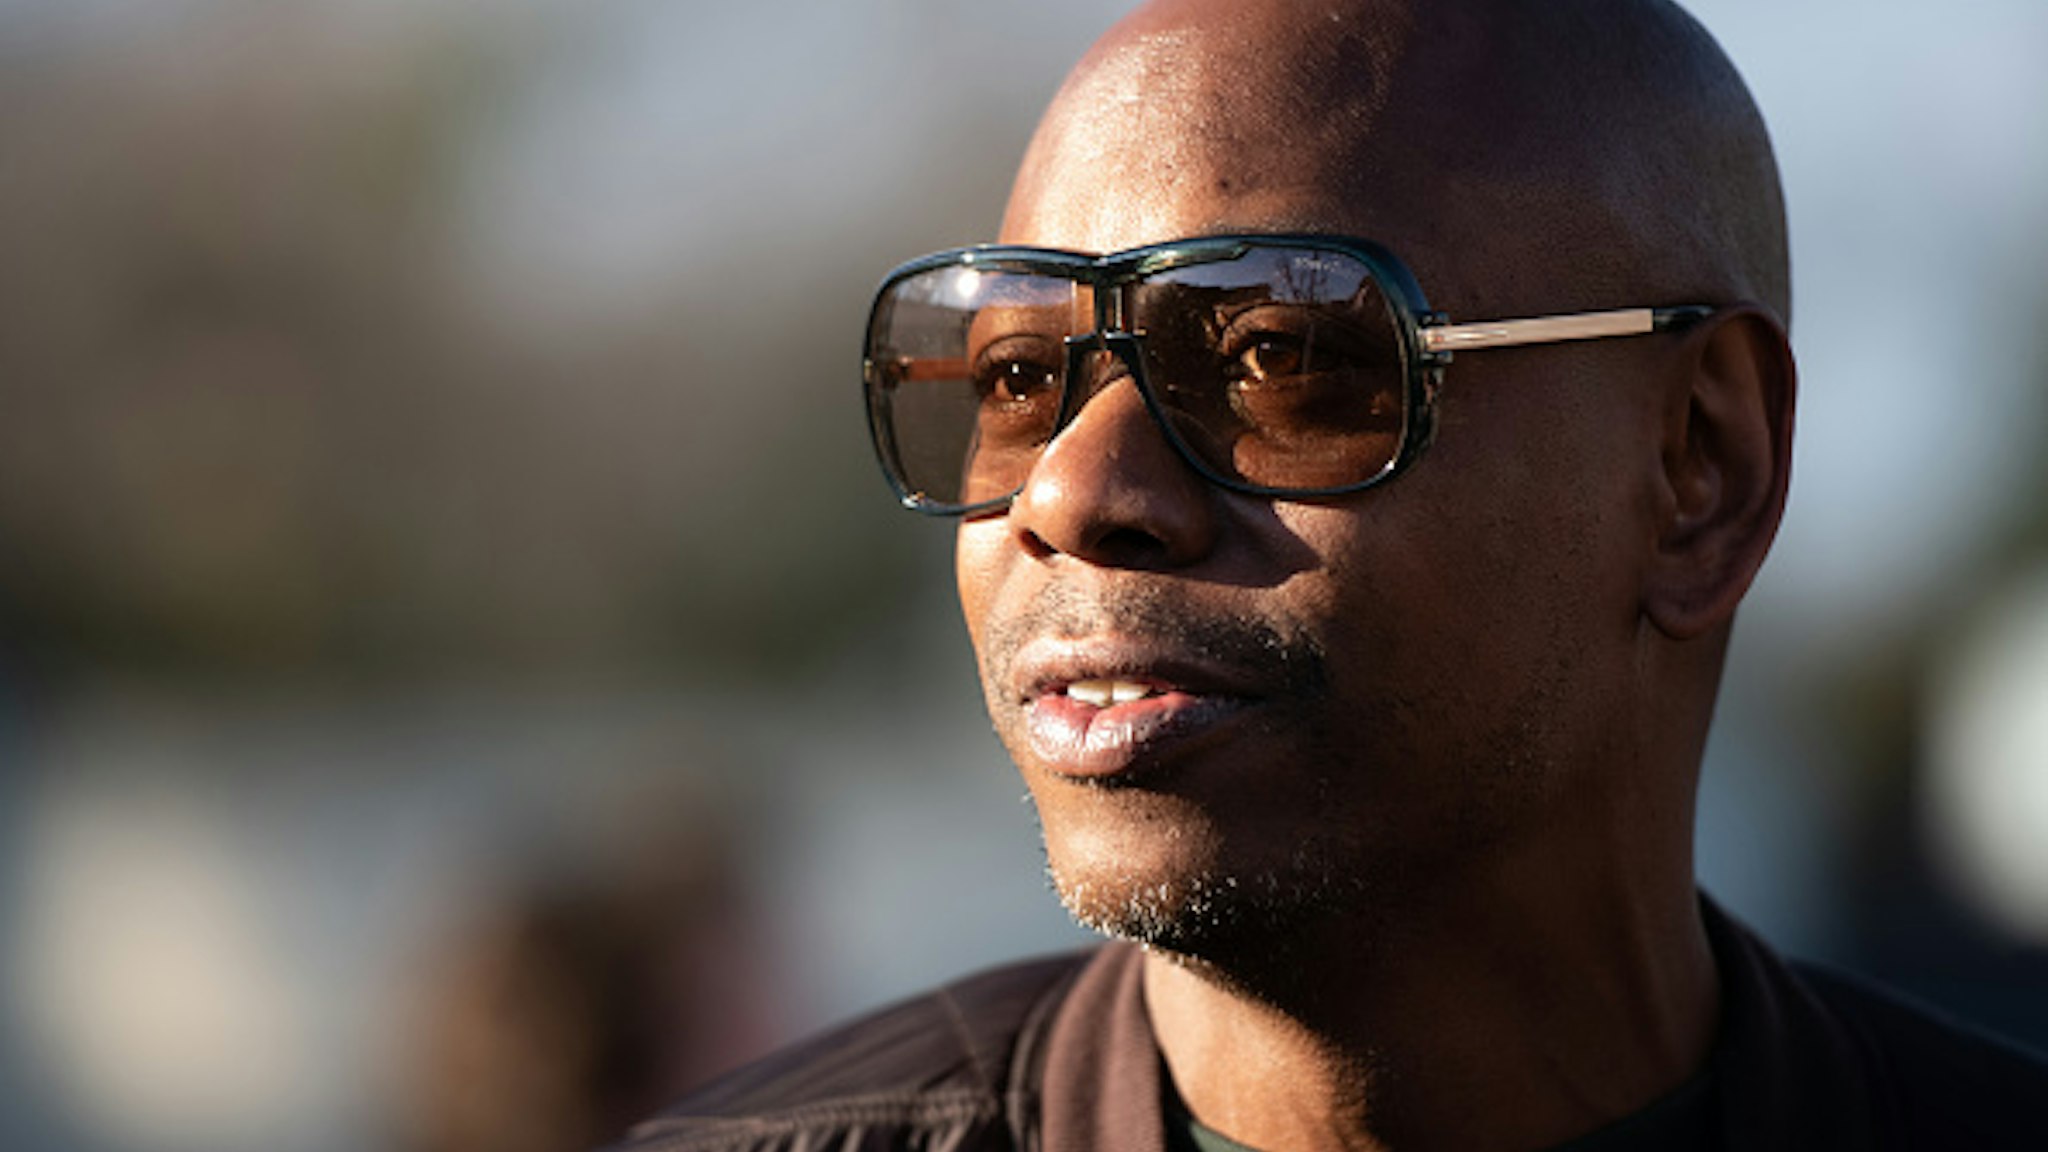 CHARLESTON, SC - JANUARY 30: Comedian Dave Chappelle campaigns for Democratic presidential candidate Andrew Yang on January 30, 2020 in North Charleston, South Carolina. The comedian has endorsed the candidate and performs the second of two South Carolina campaign benefit shows Thursday evening in Charleston.